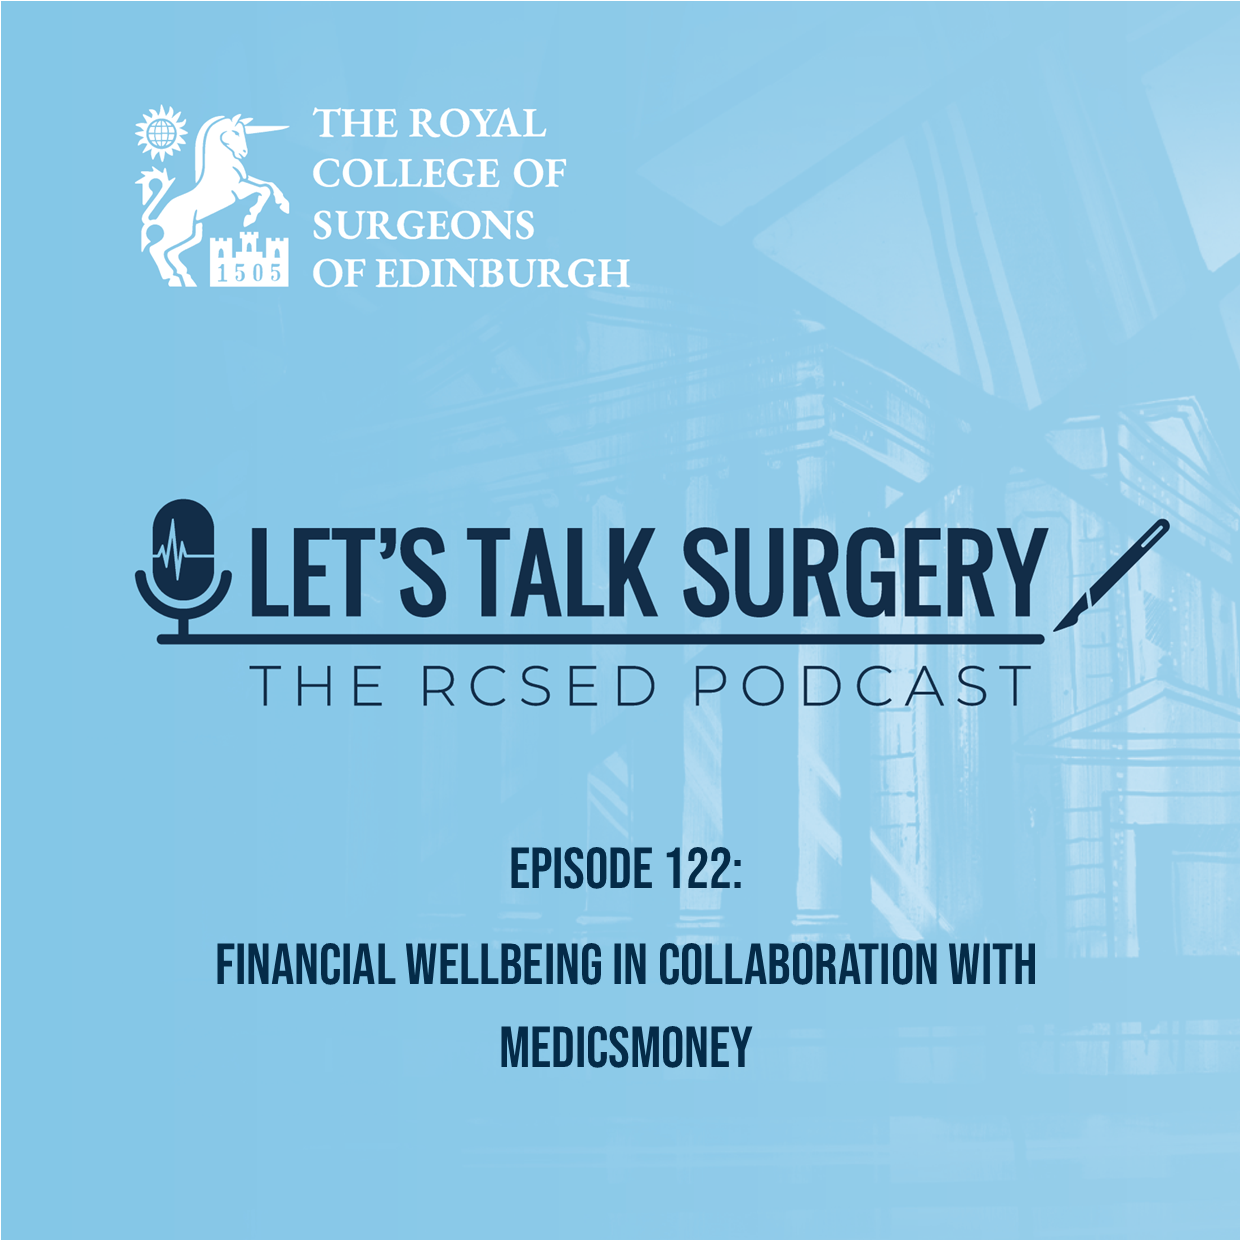 Financial Wellbeing in collaboration with MedicsMoney